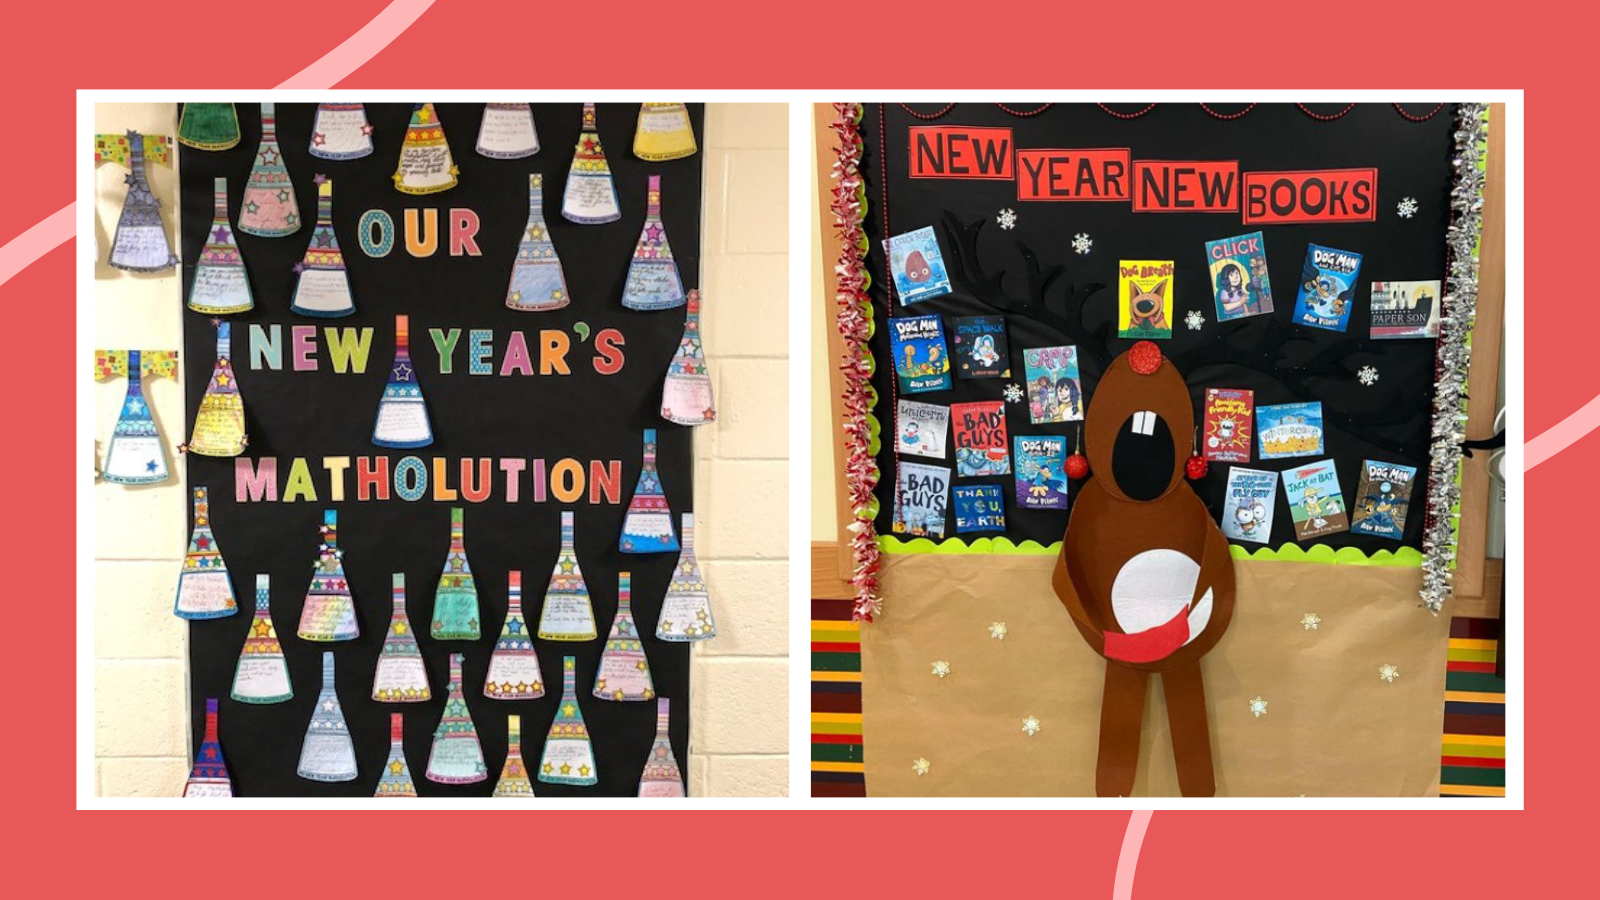 New year bulletin board ideas including New Years Matholutions and New Year, New Books.